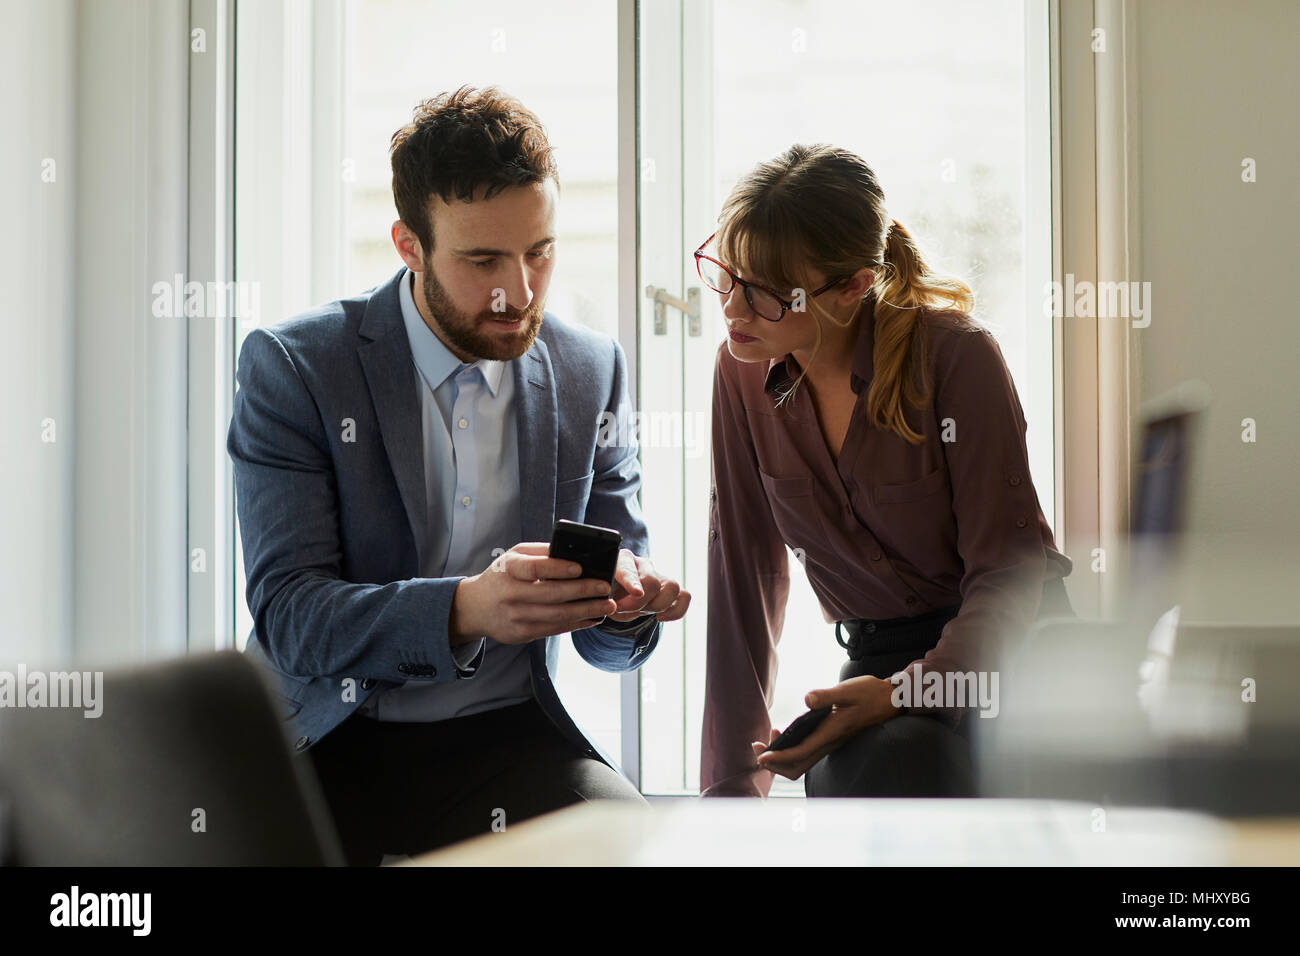 Colleagues in office looking at smartphone Stock Photo